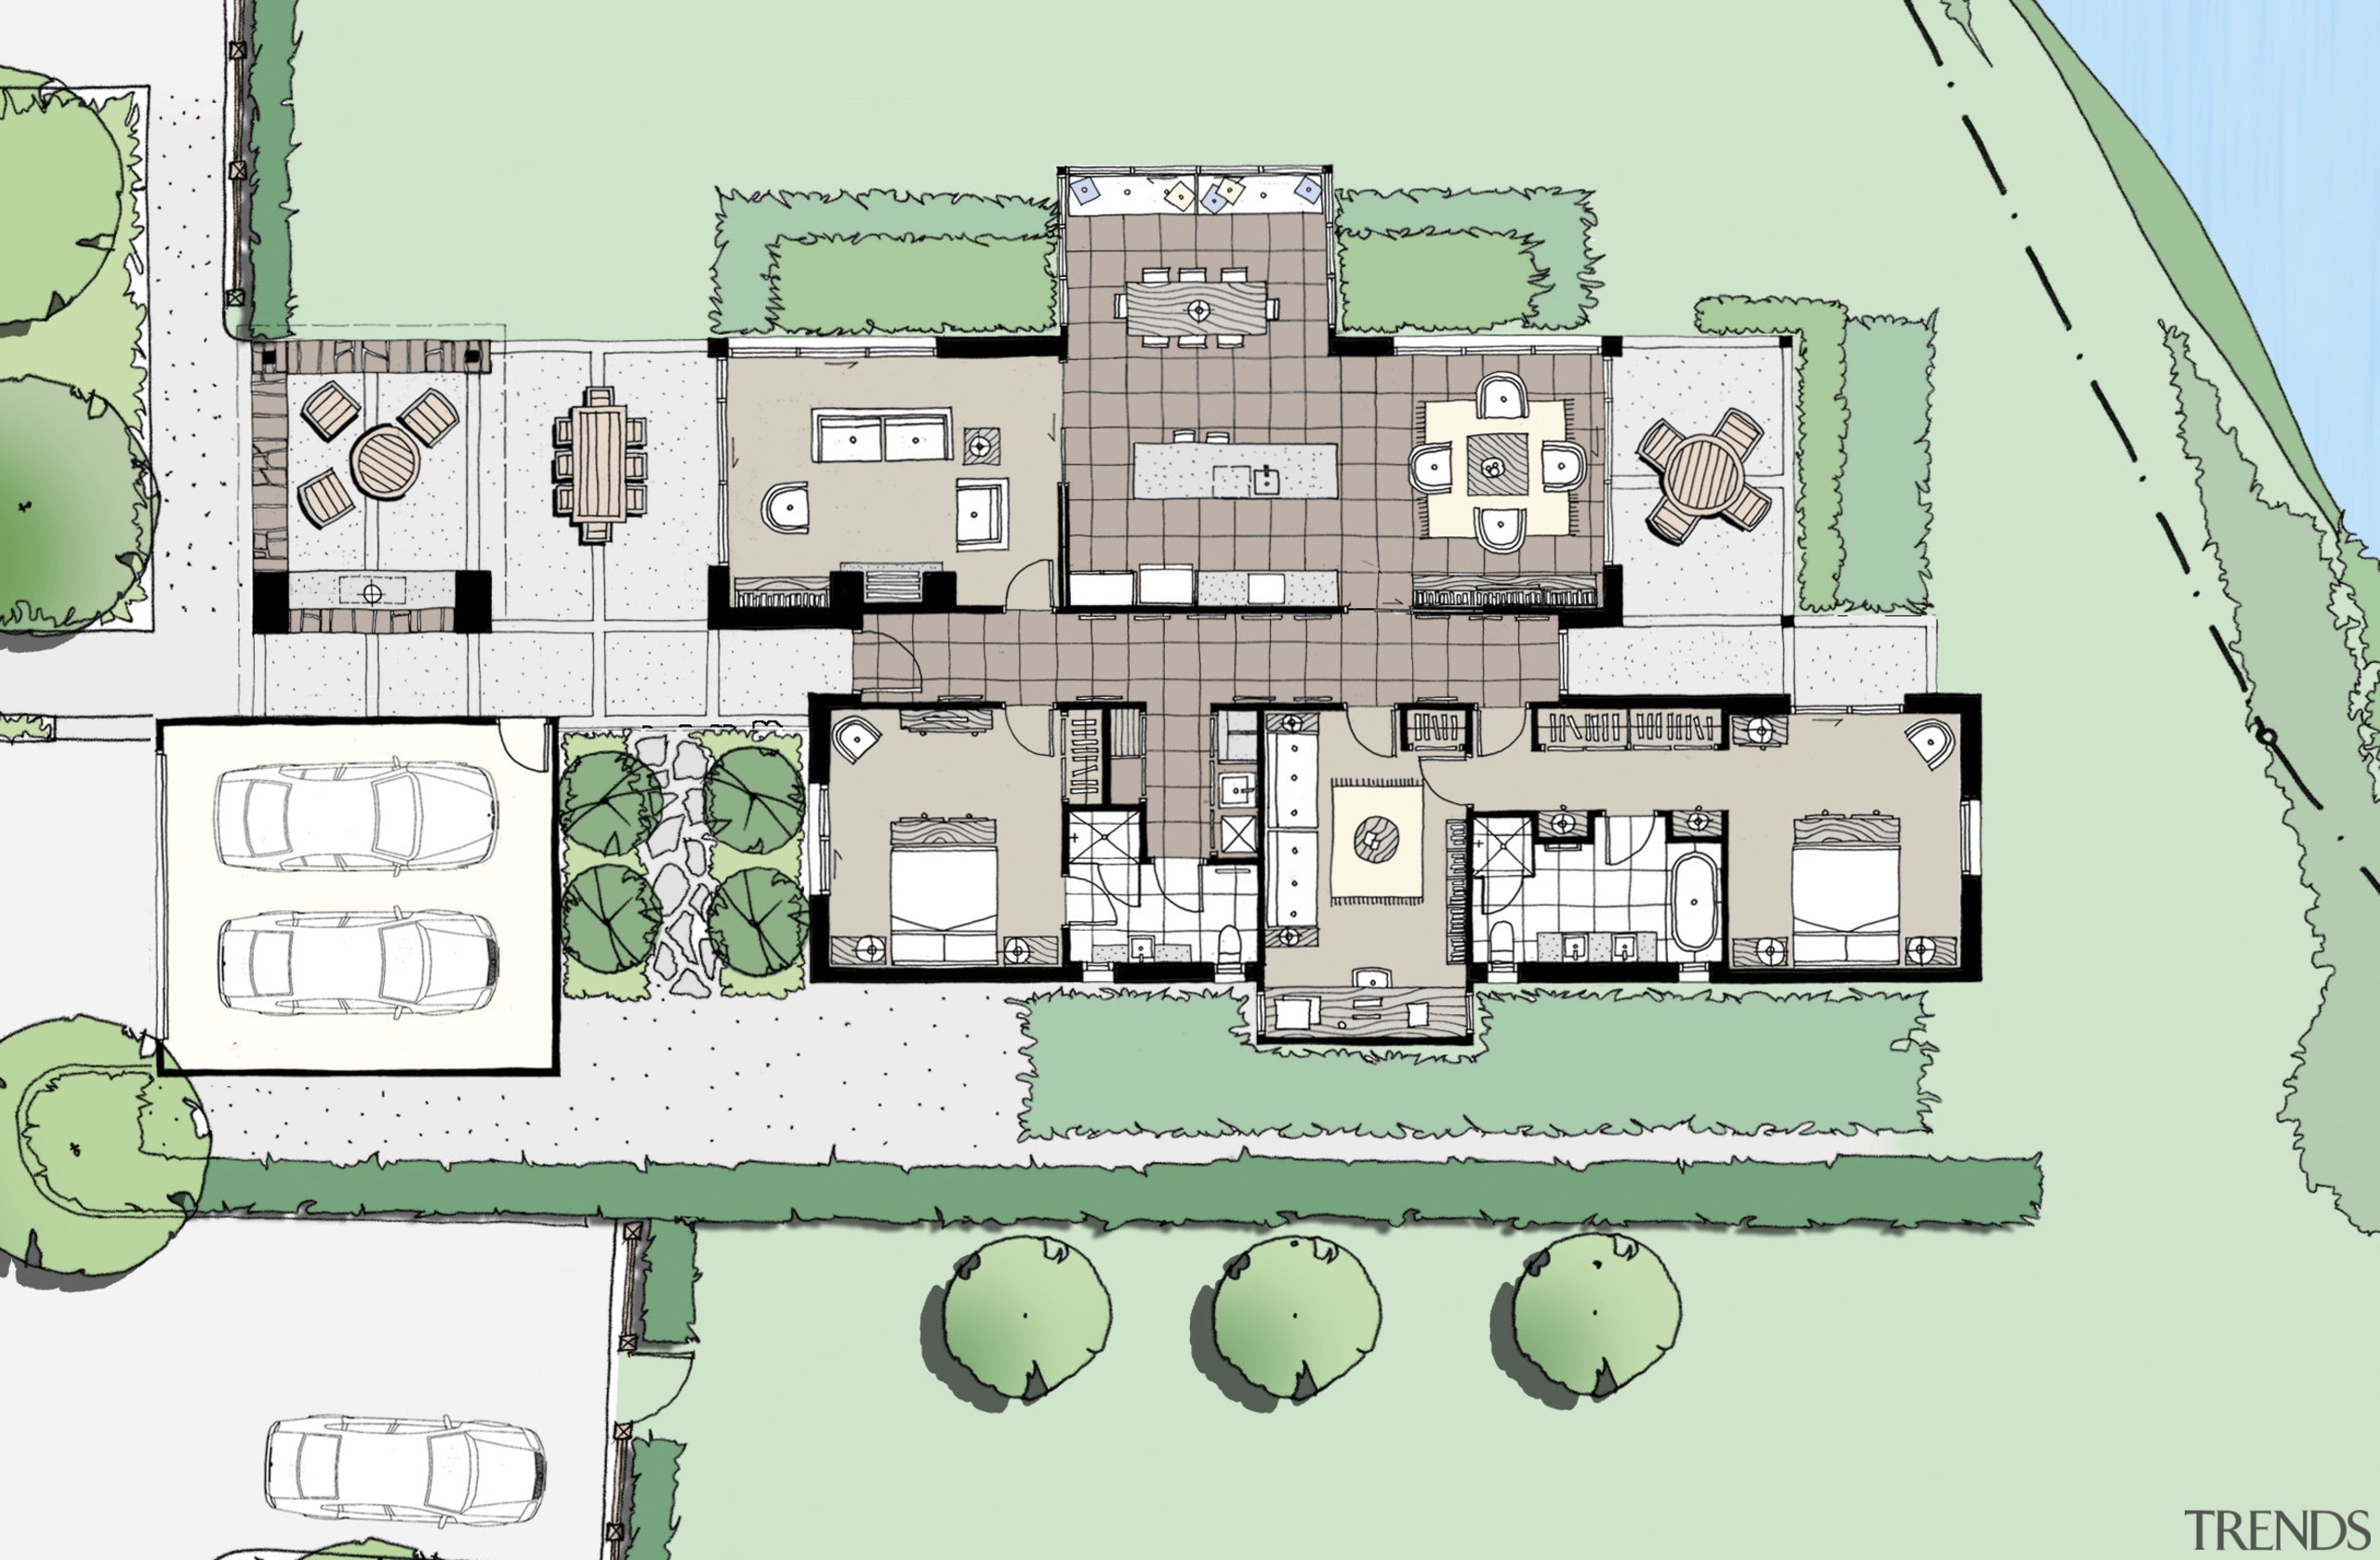 This home was designed by Mason &amp; Wales architecture, area, elevation, floor plan, home, plan, product design, property, real estate, residential area, suburb, urban design, green, white